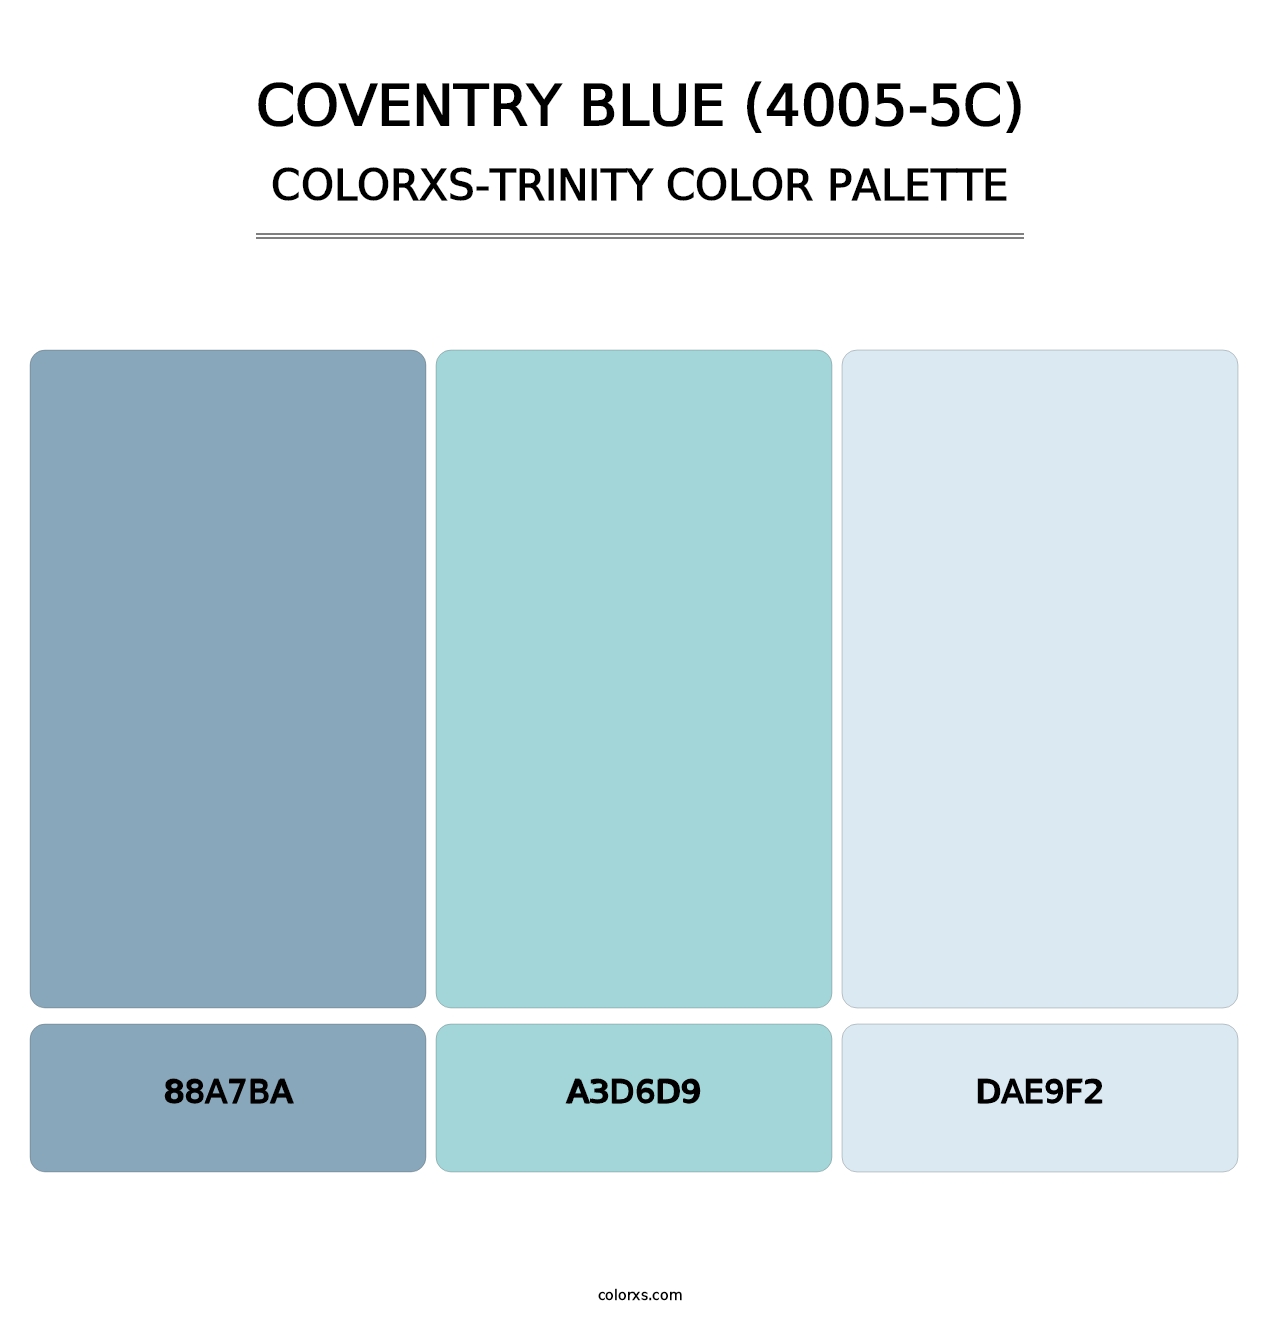 Coventry Blue (4005-5C) - Colorxs Trinity Palette